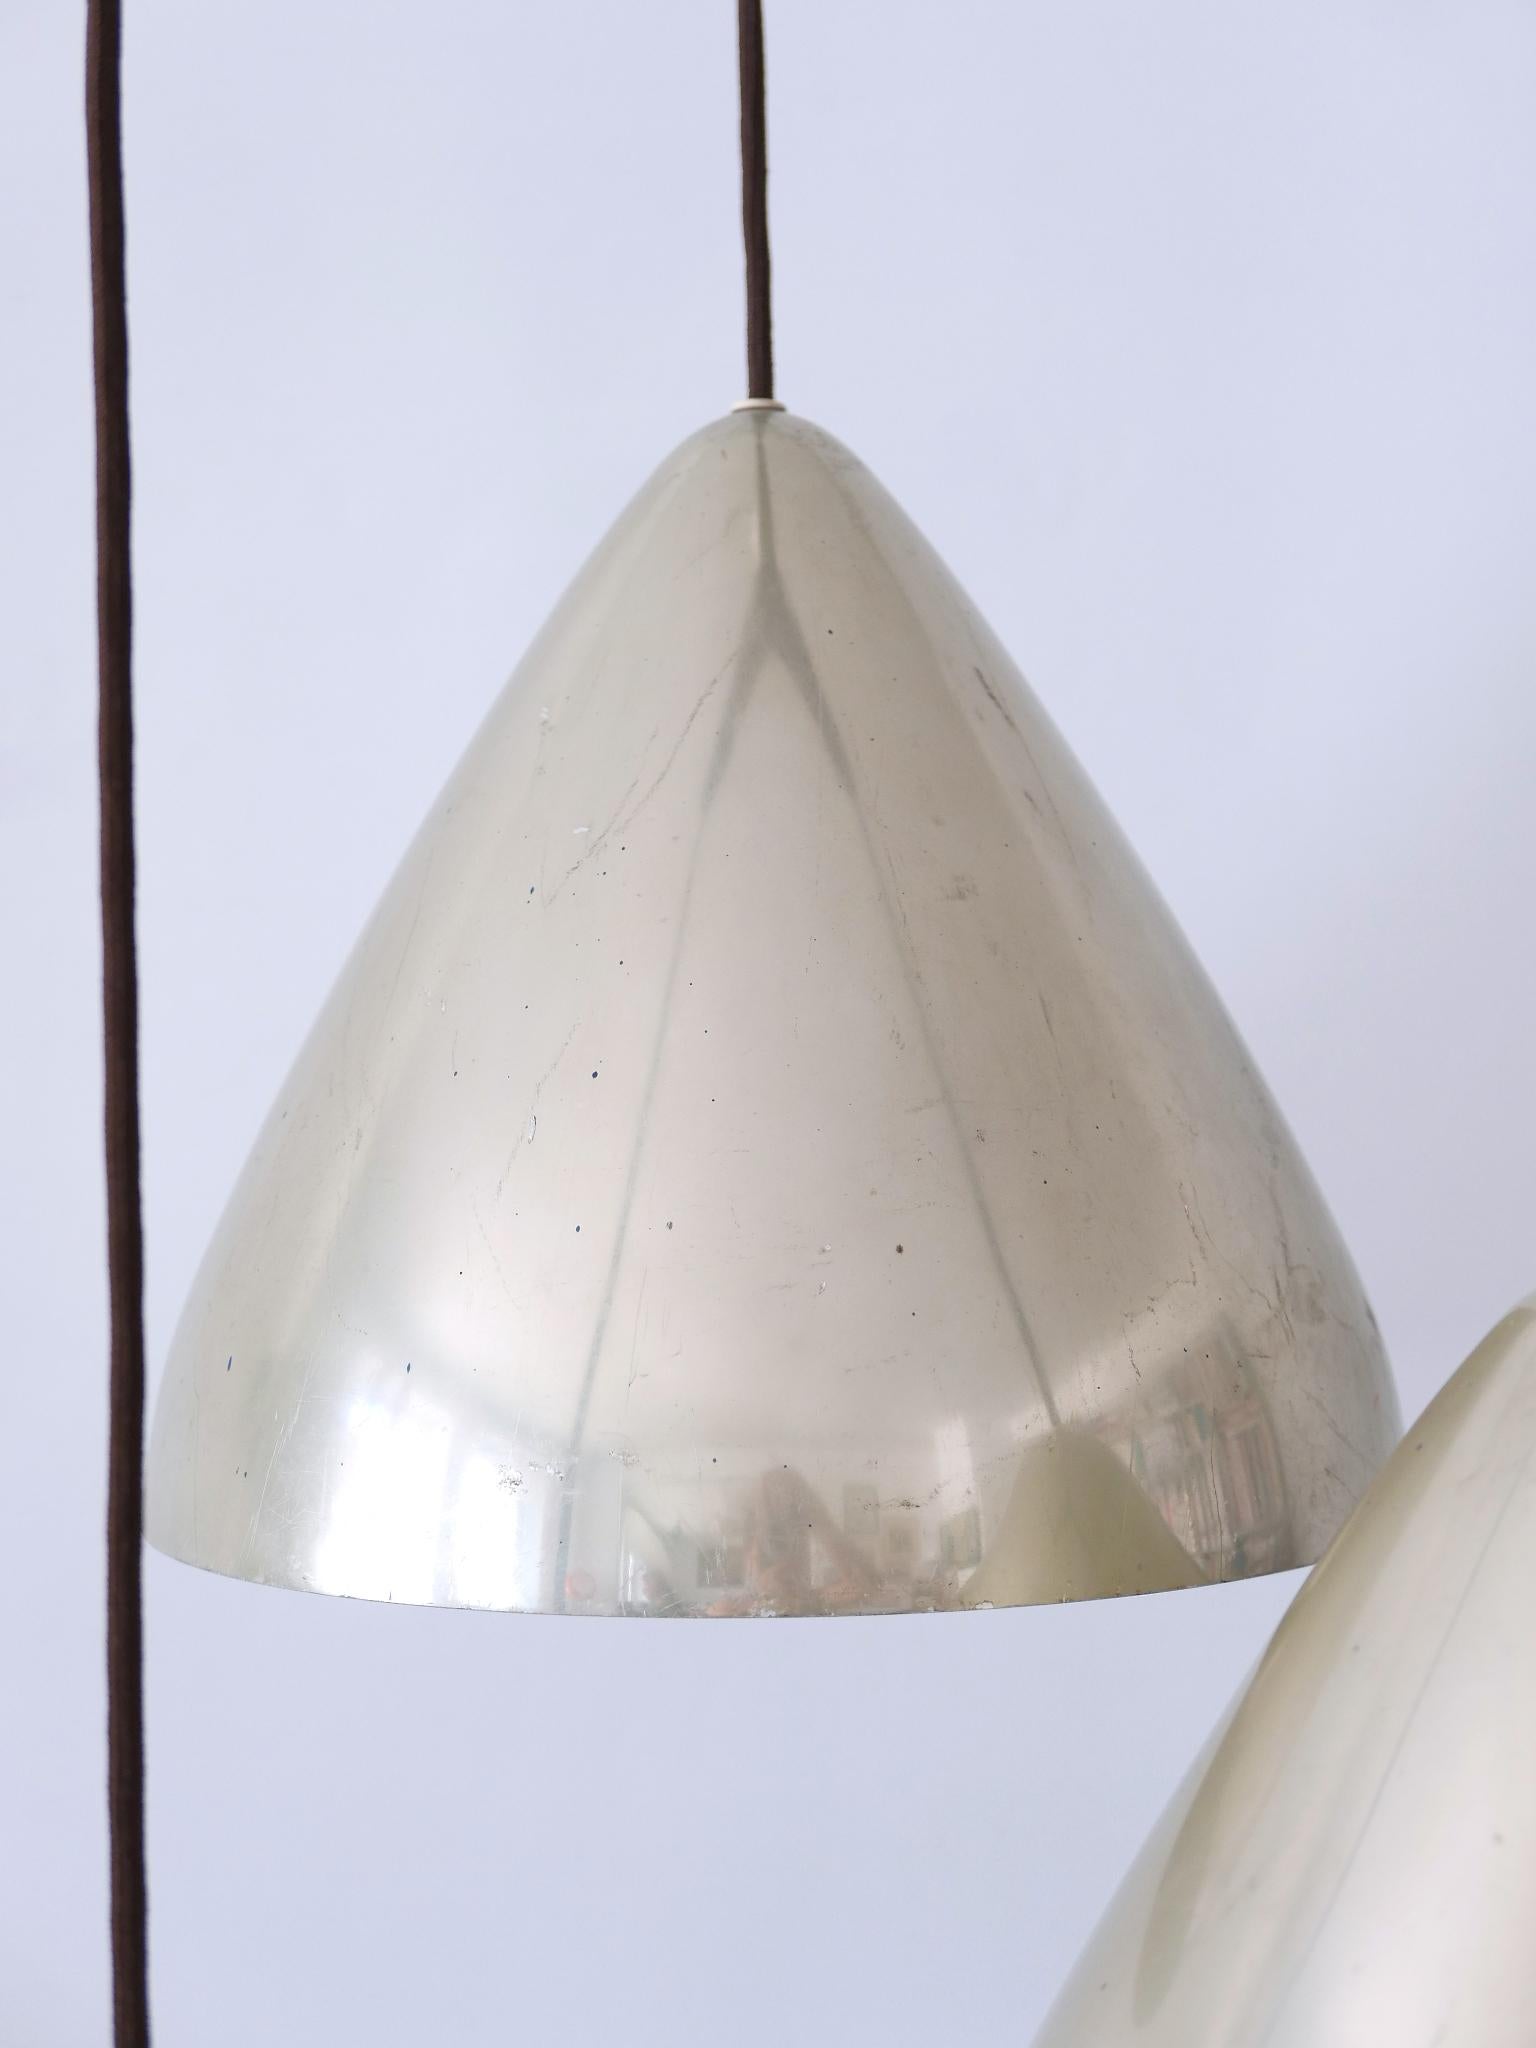 Elegant Cascading Pendant Lamp by Lisa Johansson-Pape for Orno Finland 1960s For Sale 10